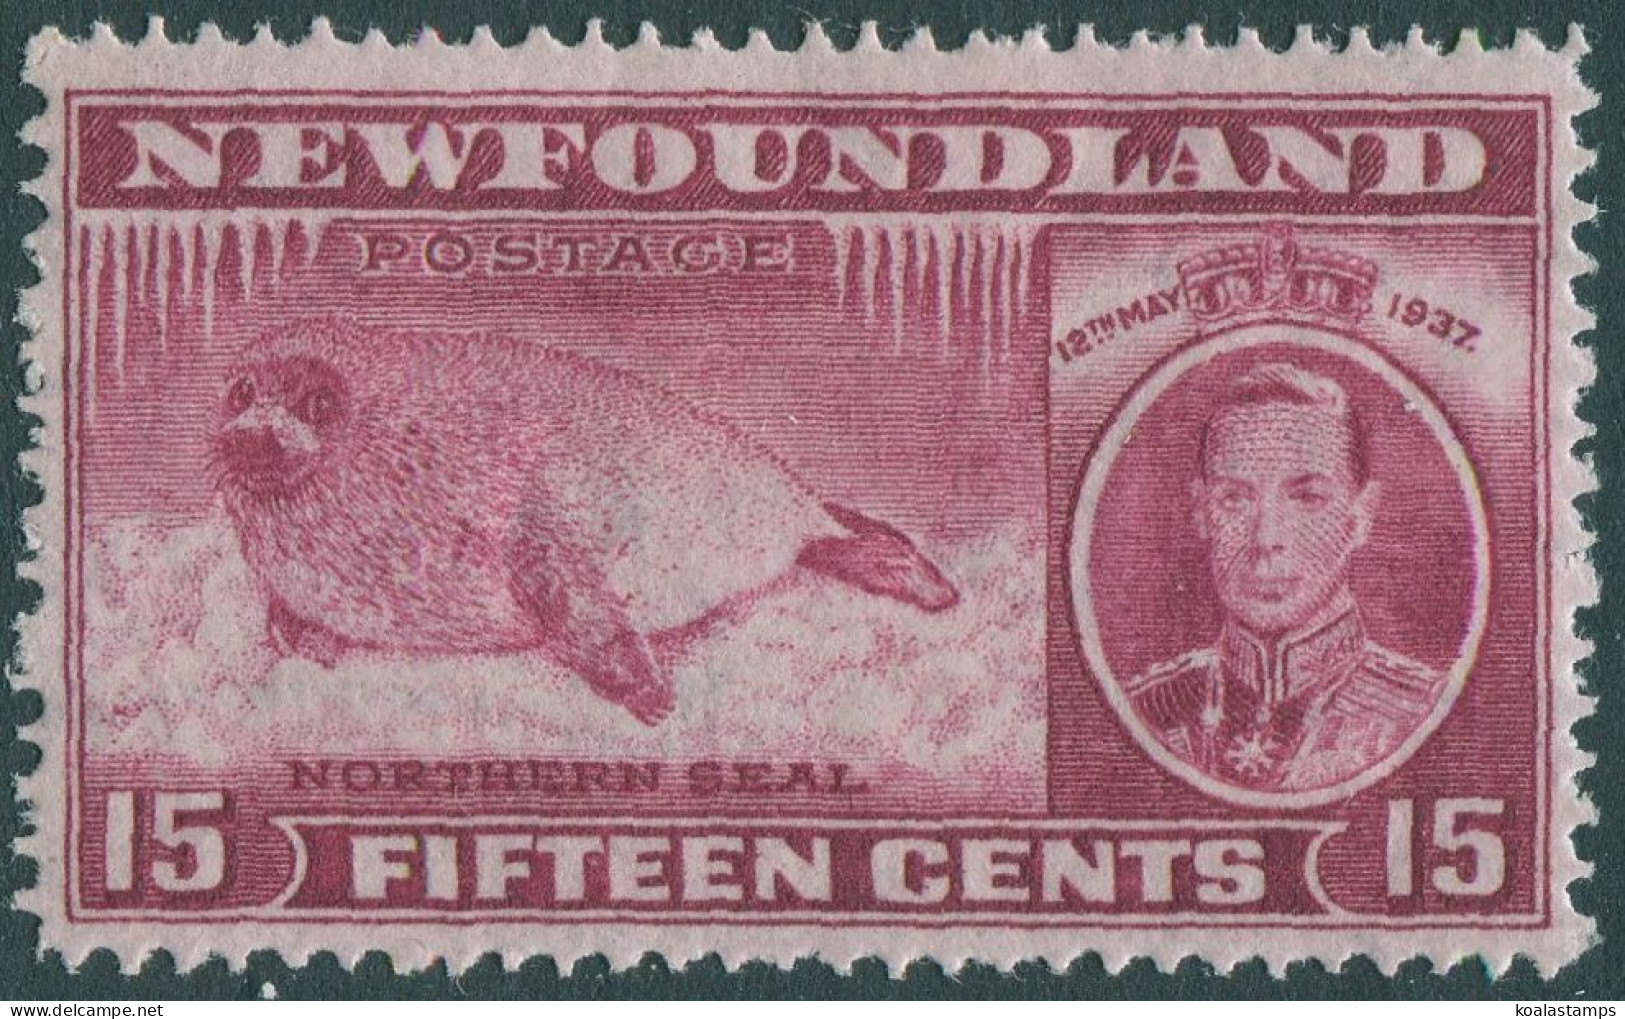 Newfoundland 1937 SG263 15c Red Harp Seal Thin On Back MLH - 1865-1902